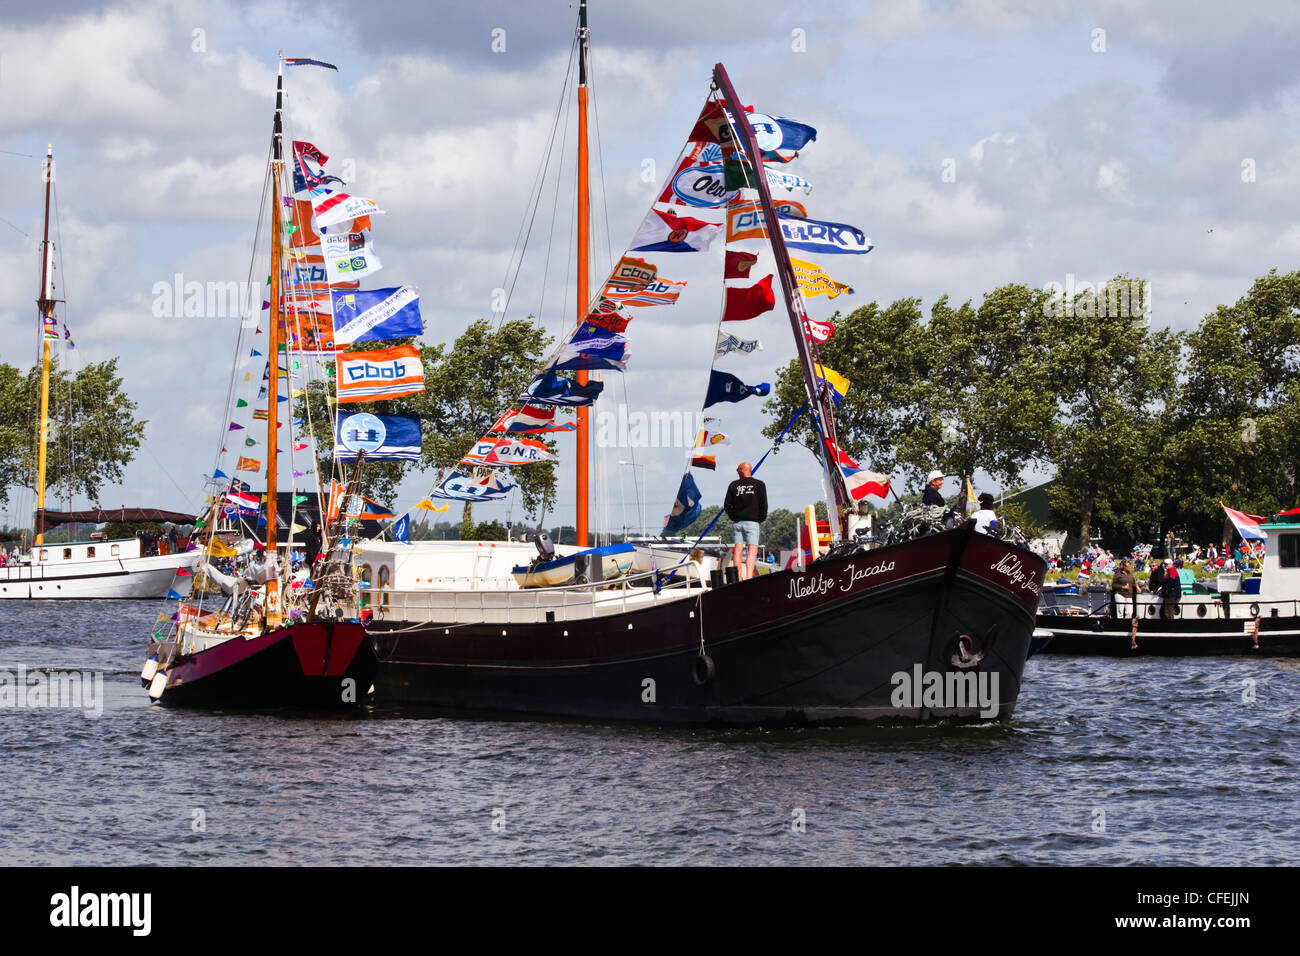 Amsterdam Sail 2010 event in the Netherlands starts with the spectacular Sail-in Parade. Stock Photo